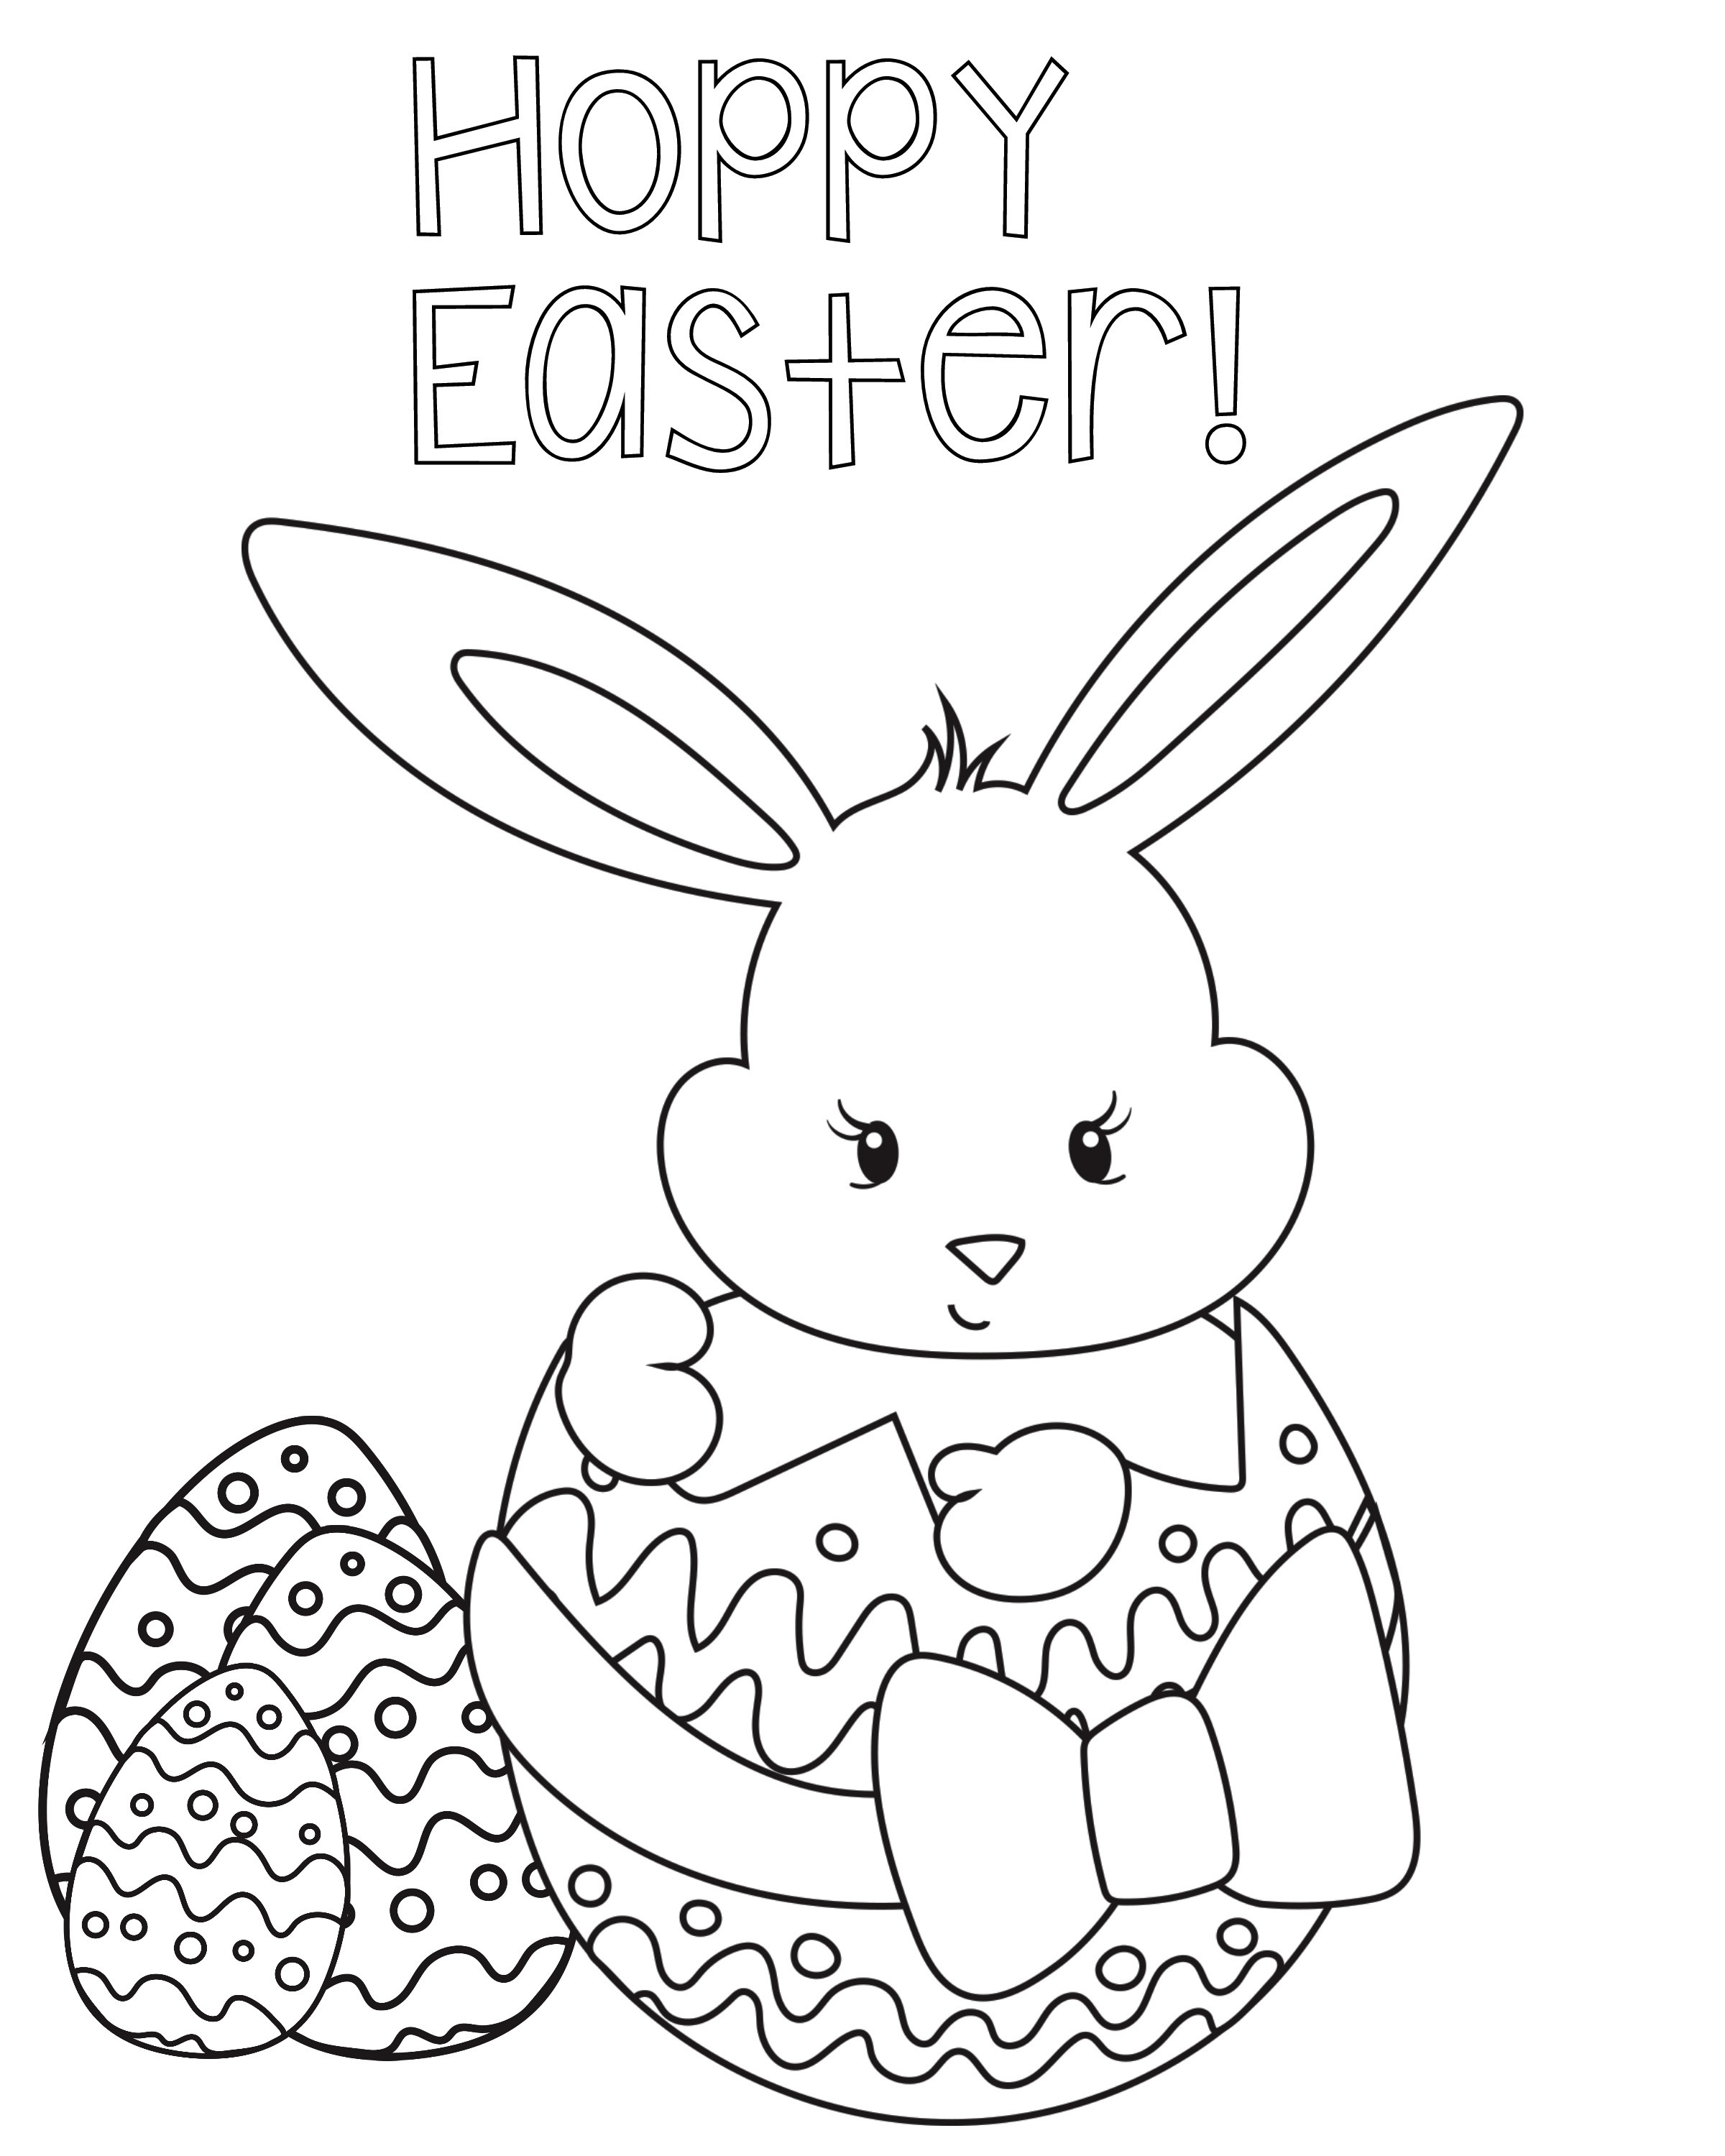 Free Easter Coloring Pages For Toddlers
 Easter Coloring Pages Best Coloring Pages For Kids